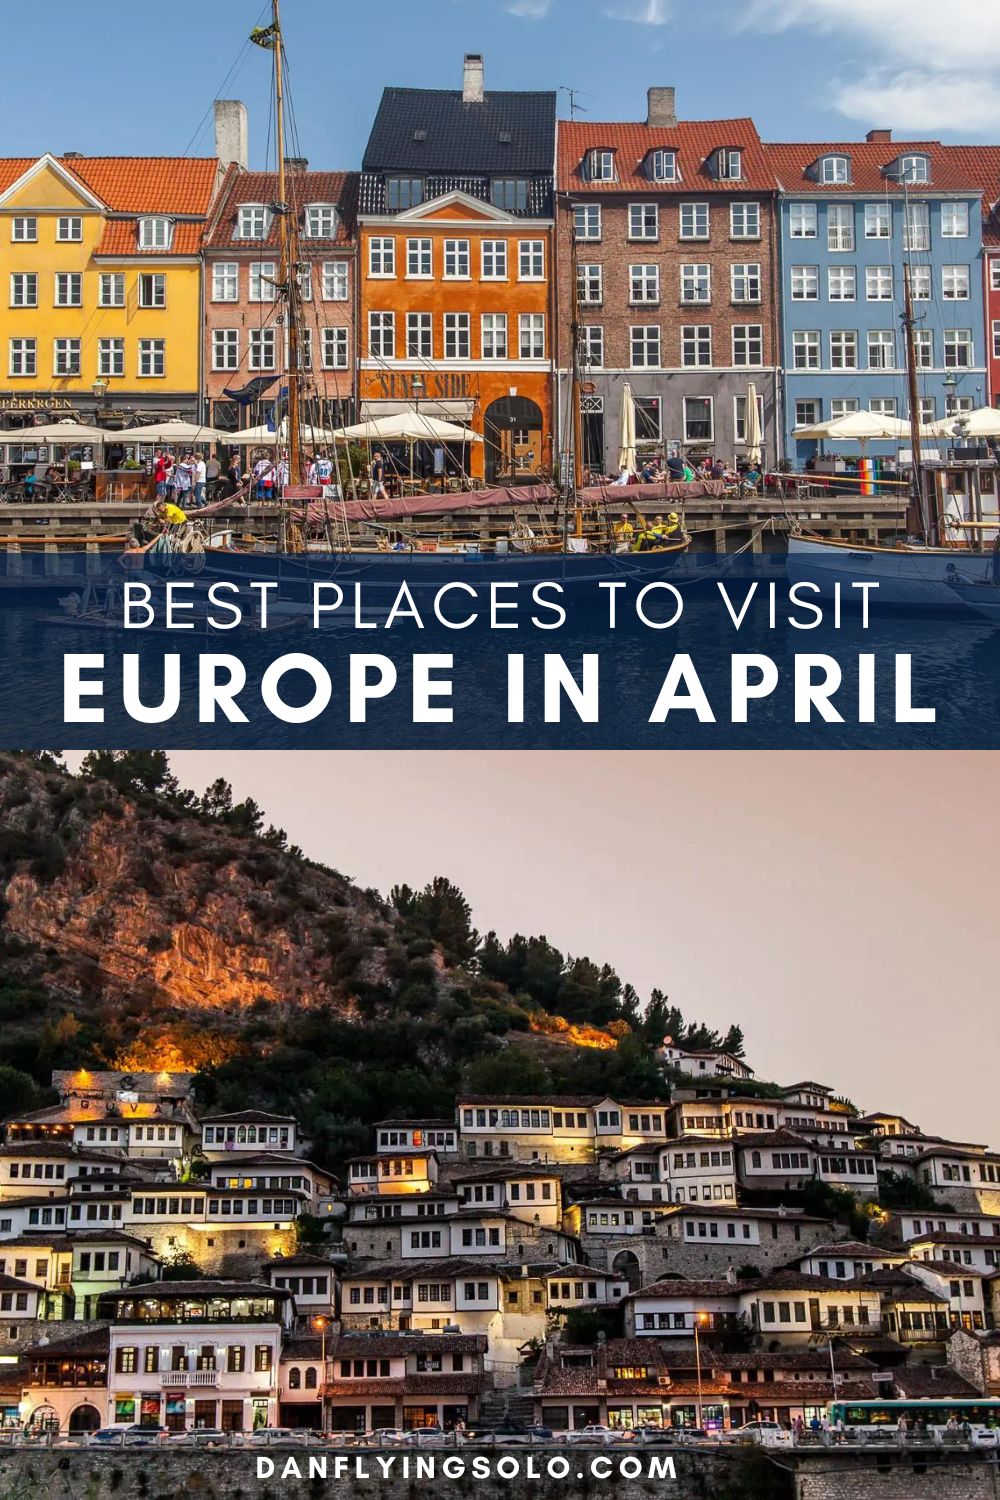 Discover some of the best places to visit in April for a European city break, an Easter getaway, and some of Europe's warmest places.